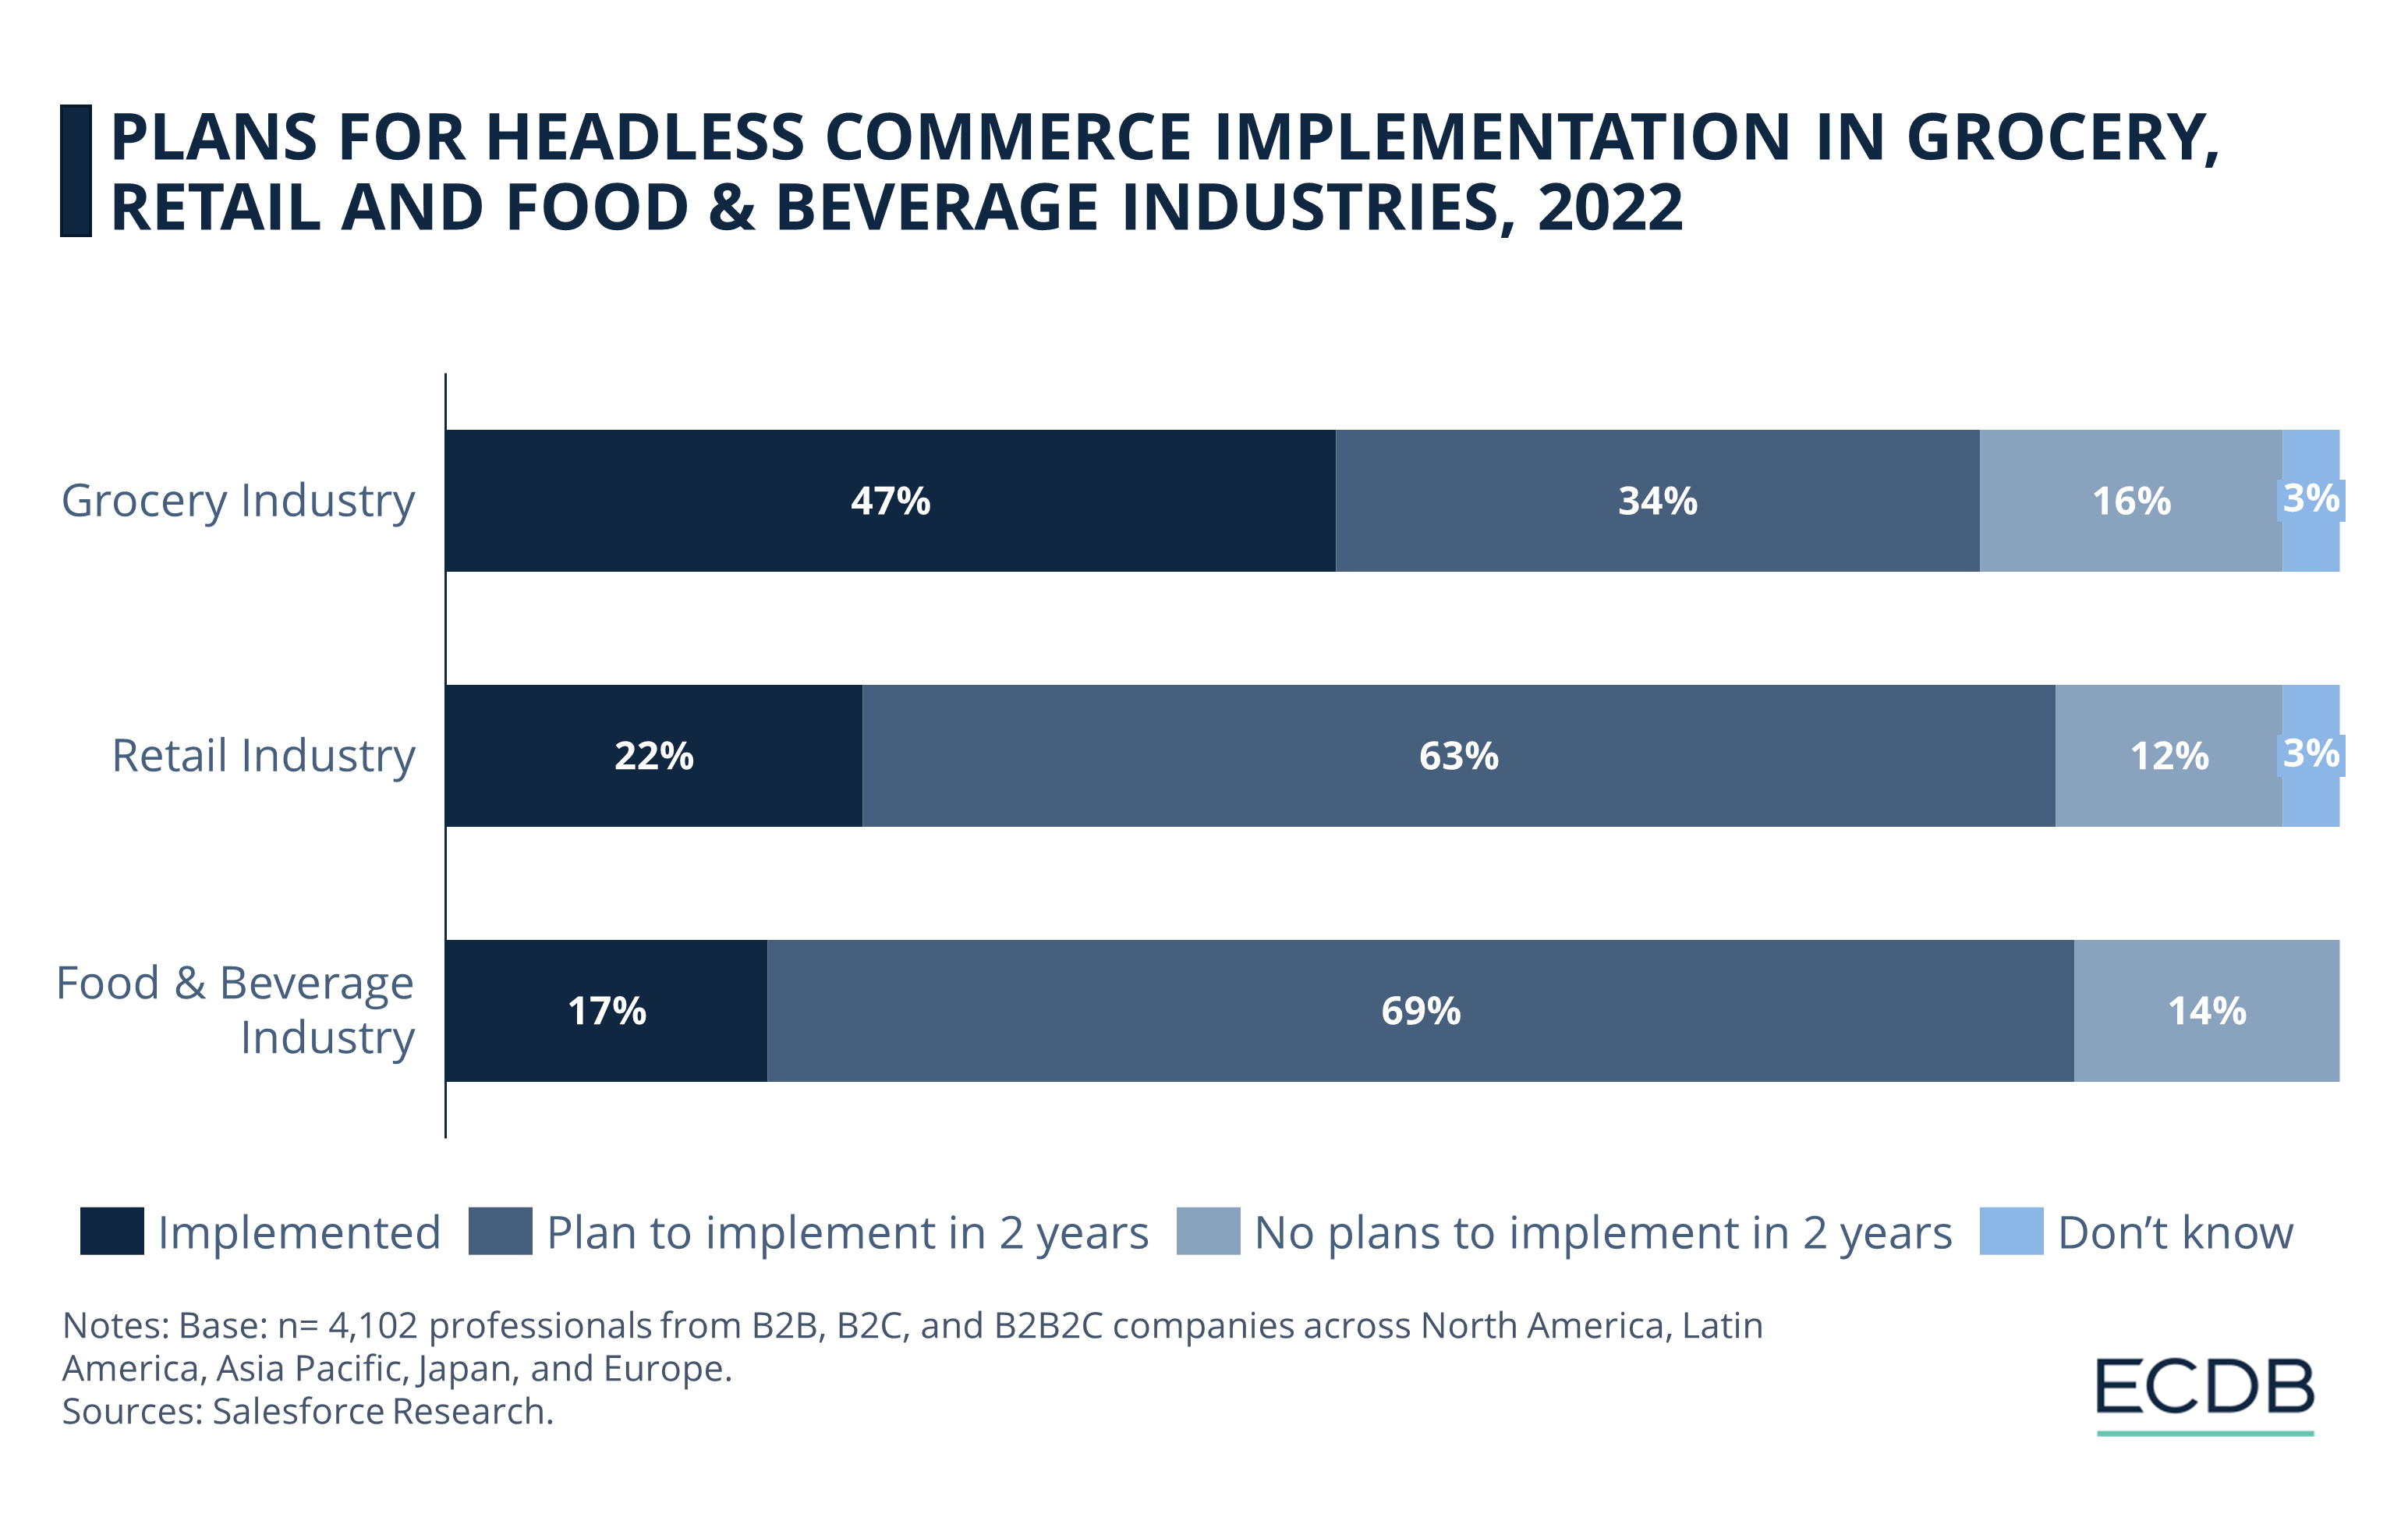 Plans for Headless Commerce Implementation in Grocery, Retail and Food & Beverage Industries, 2022